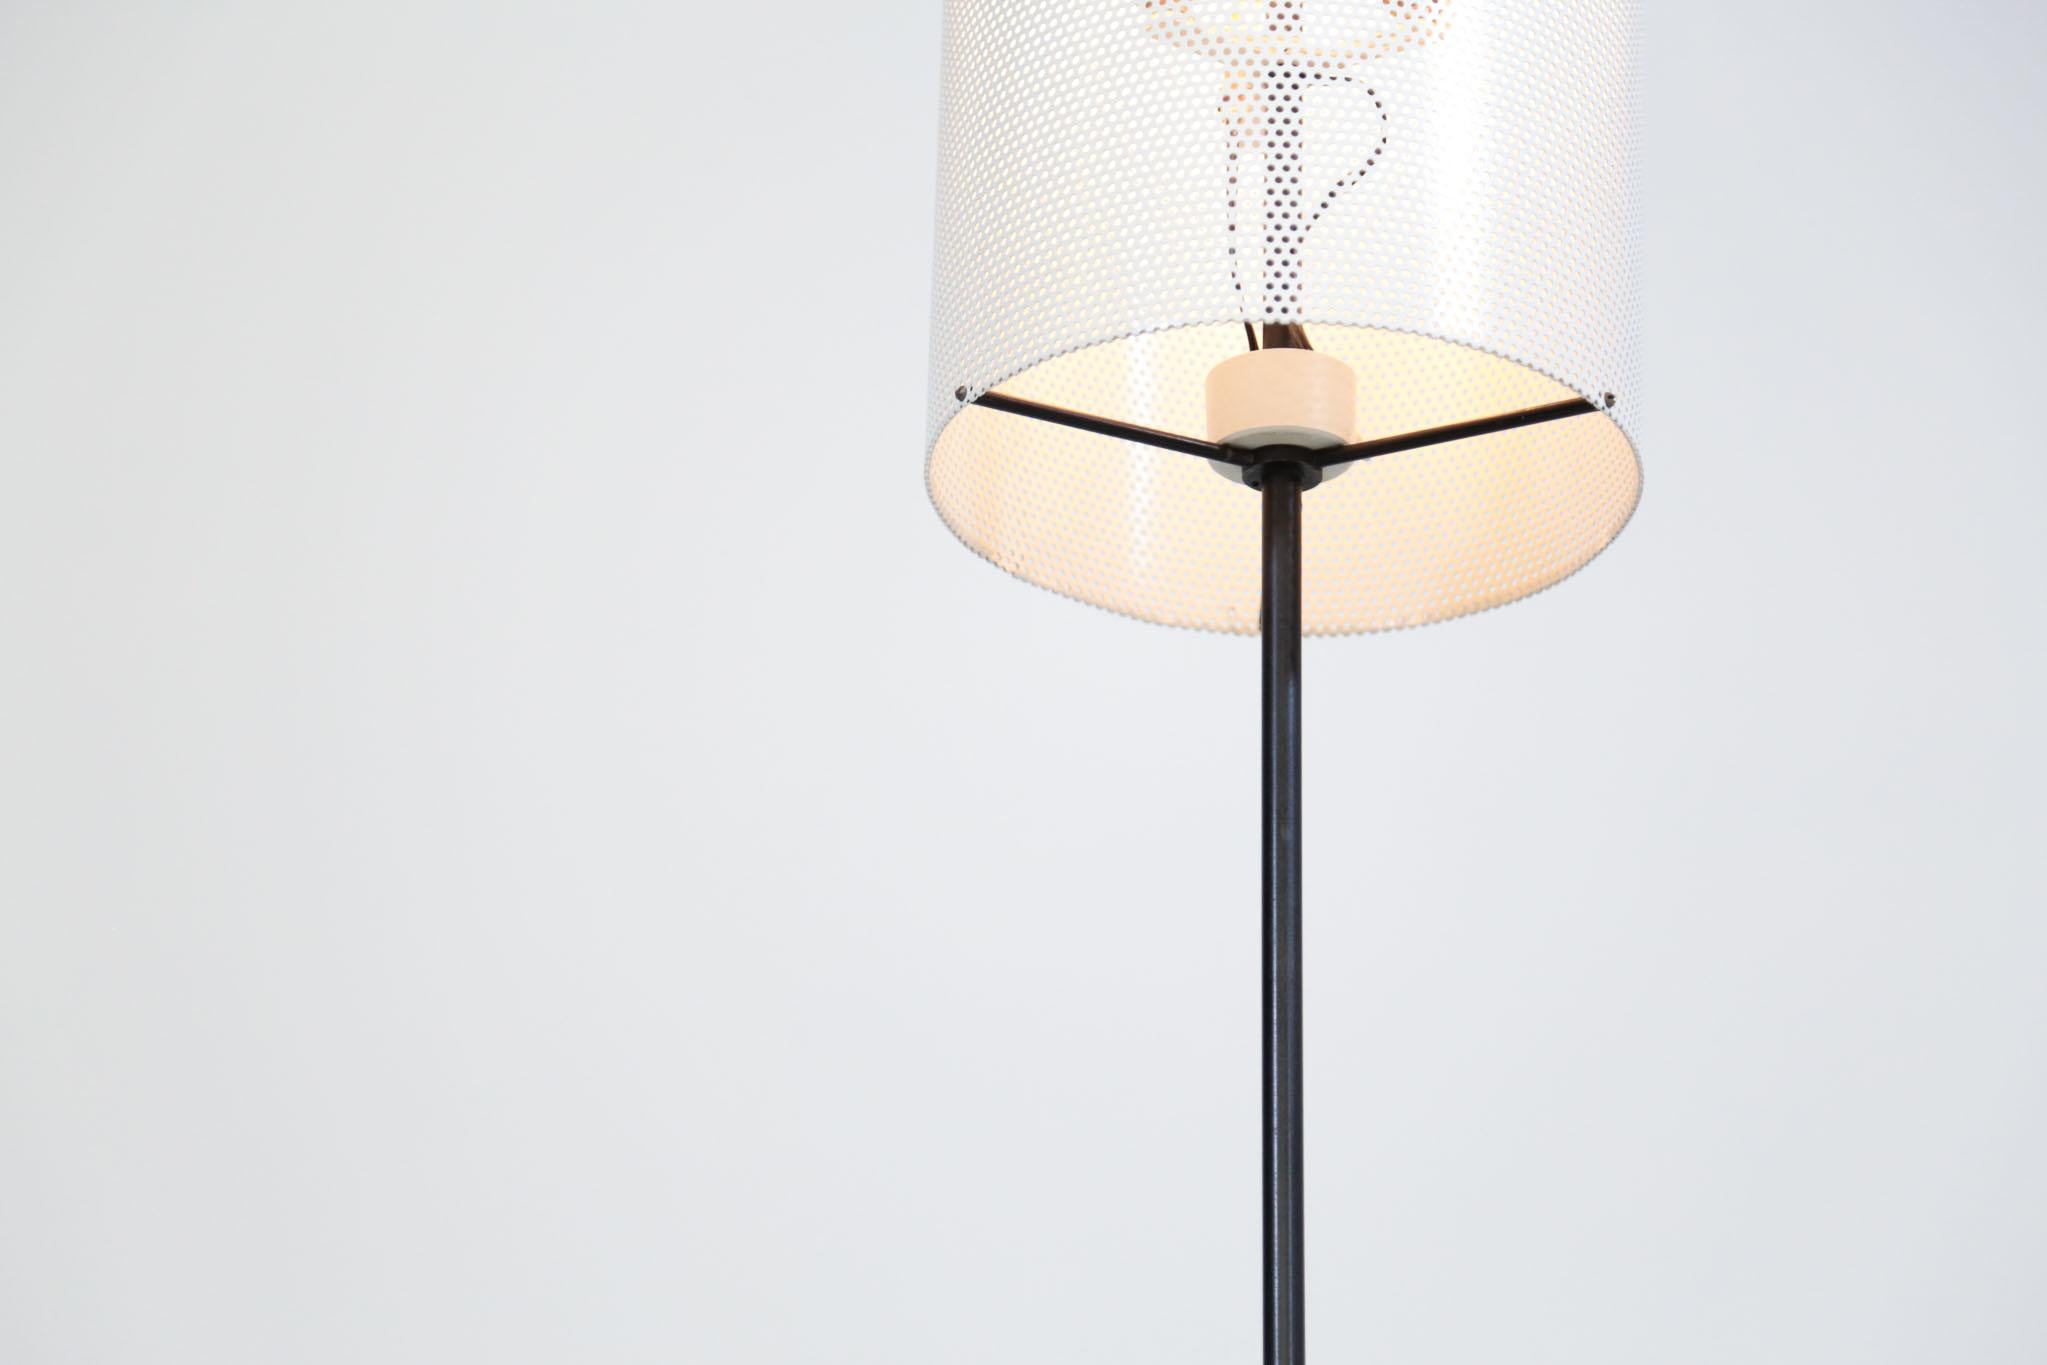 20th Century Vintage Floor Lamp with Perforated Metal Shade, 1960s